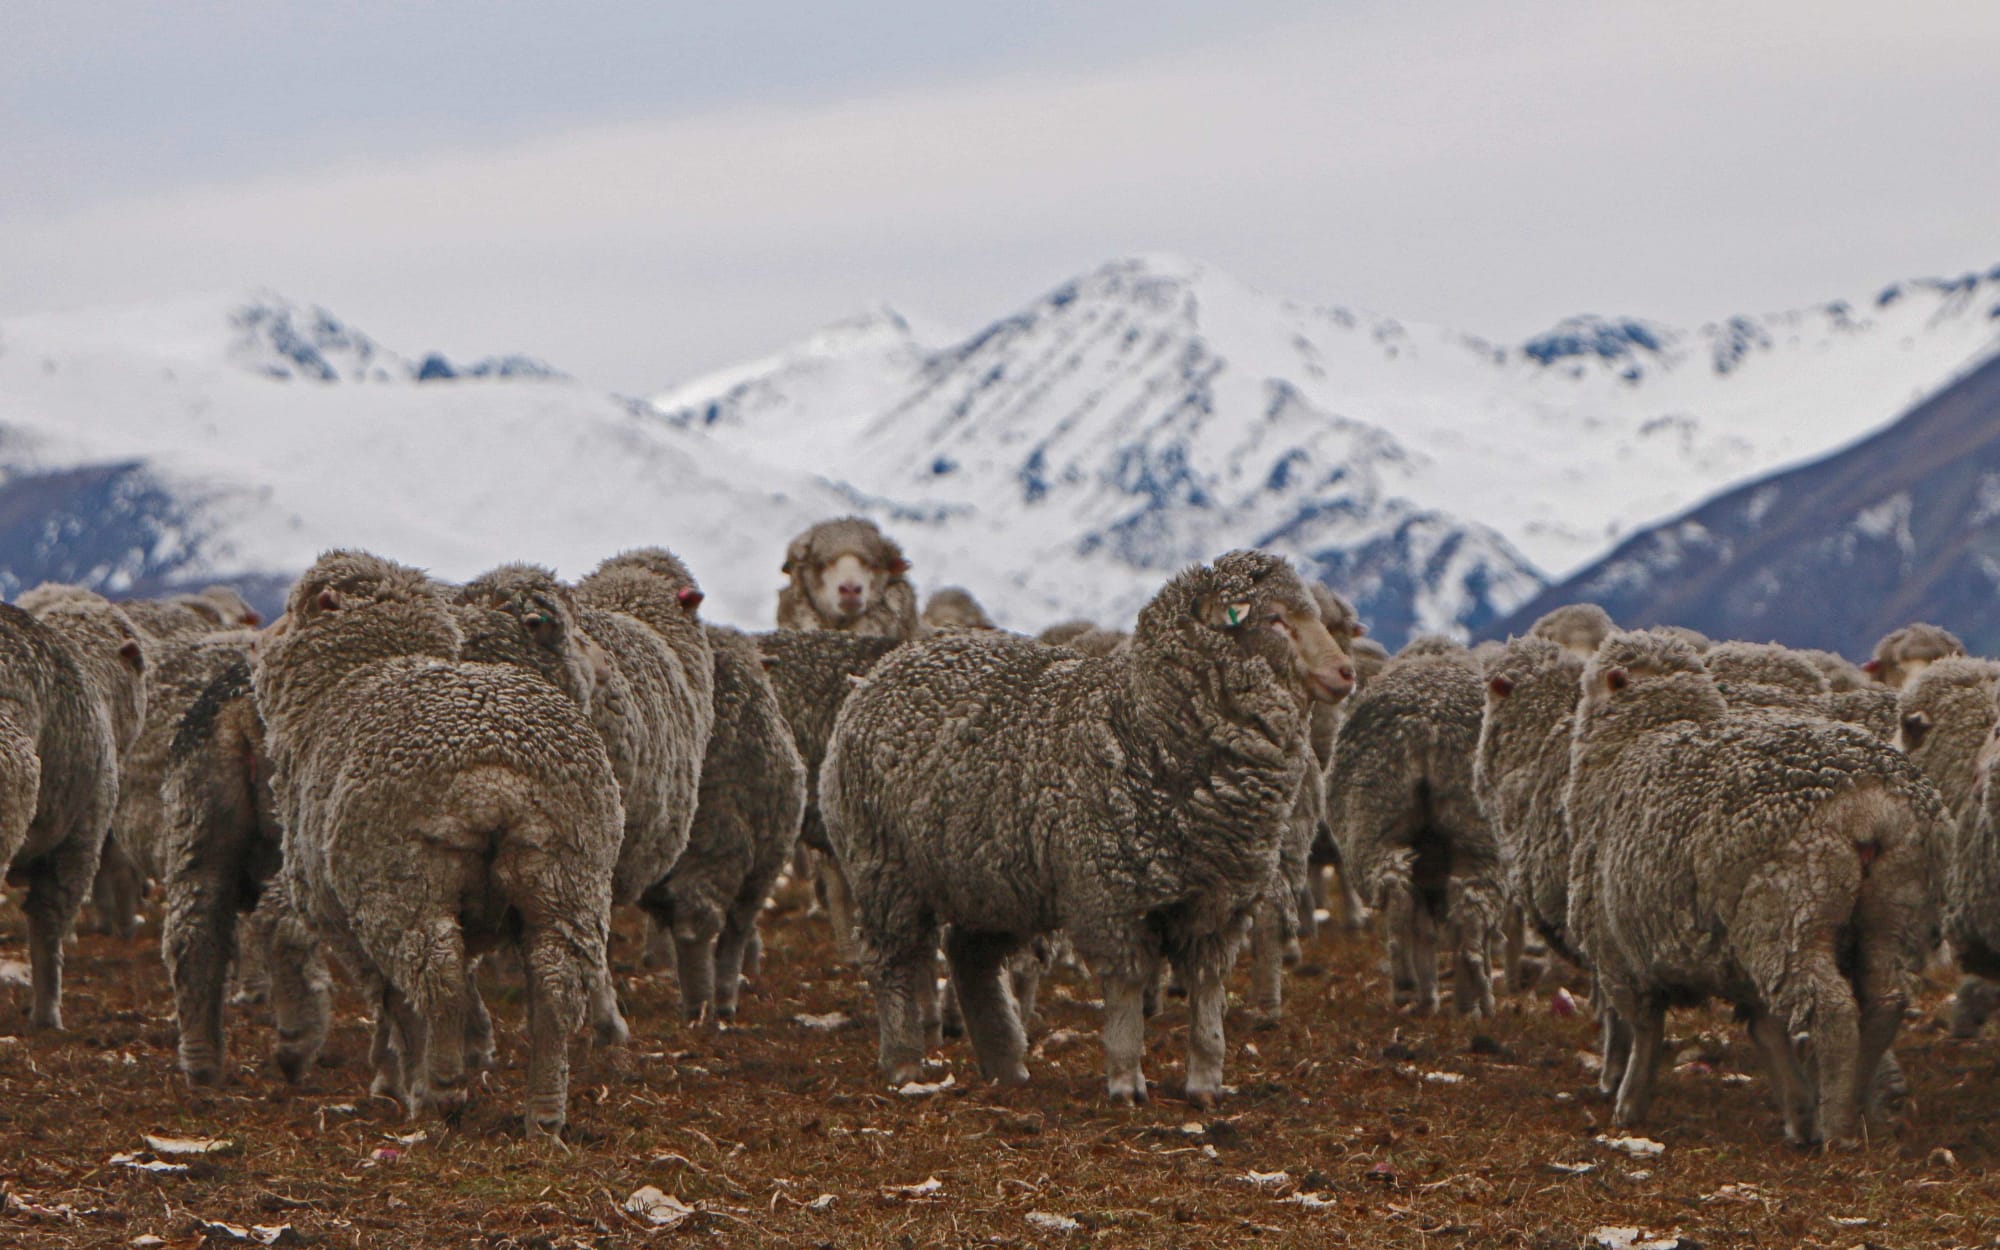 Sheep in foreground with snow clad alps behind